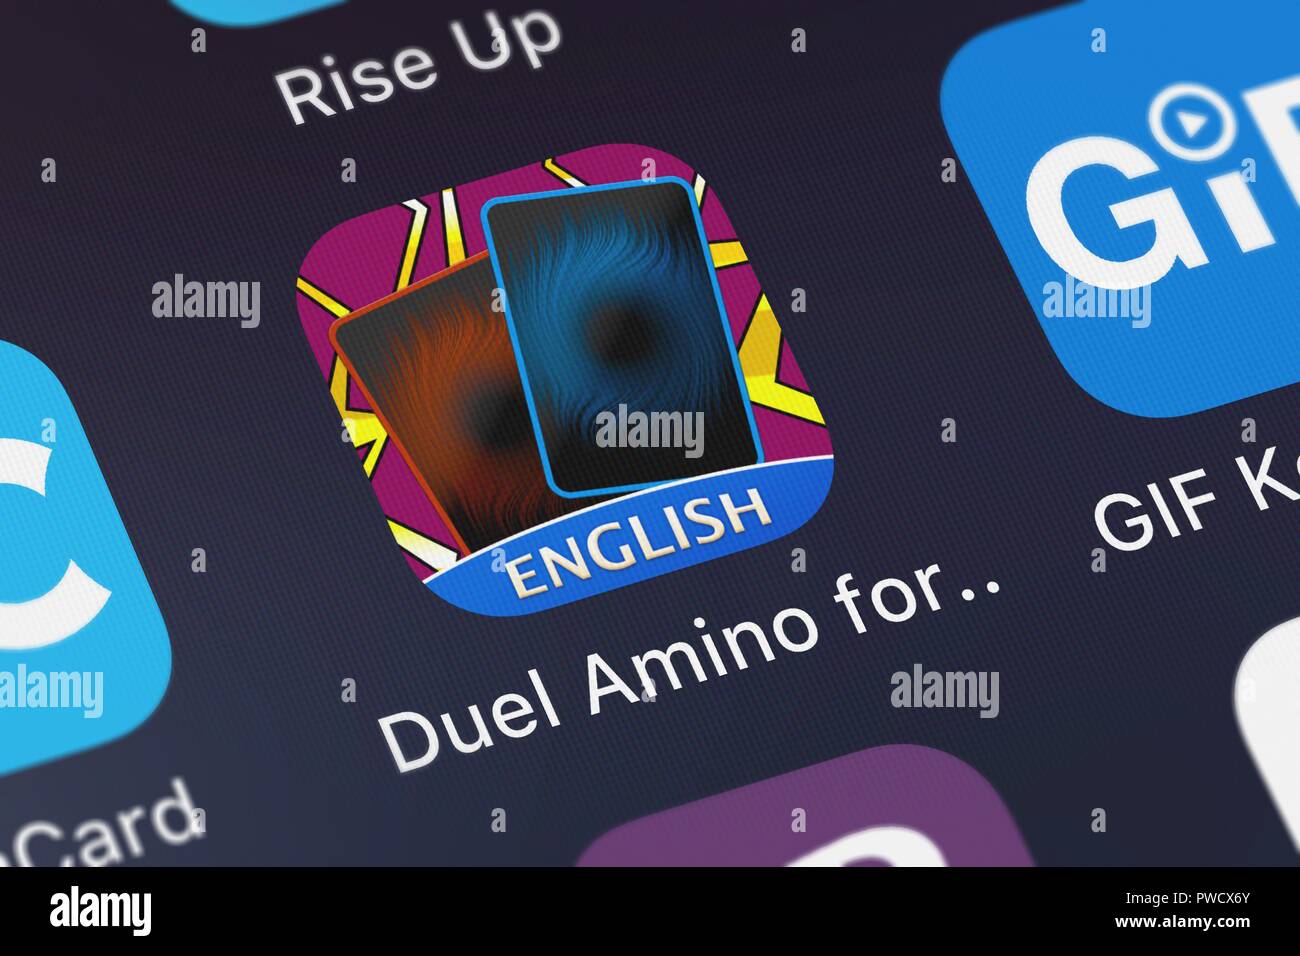 London, United Kingdom - October 15, 2018: Screenshot of the Duel Amino for Yu-Gi-Oh Fans mobile app from Narvii Inc. icon on an iPhone. Stock Photo